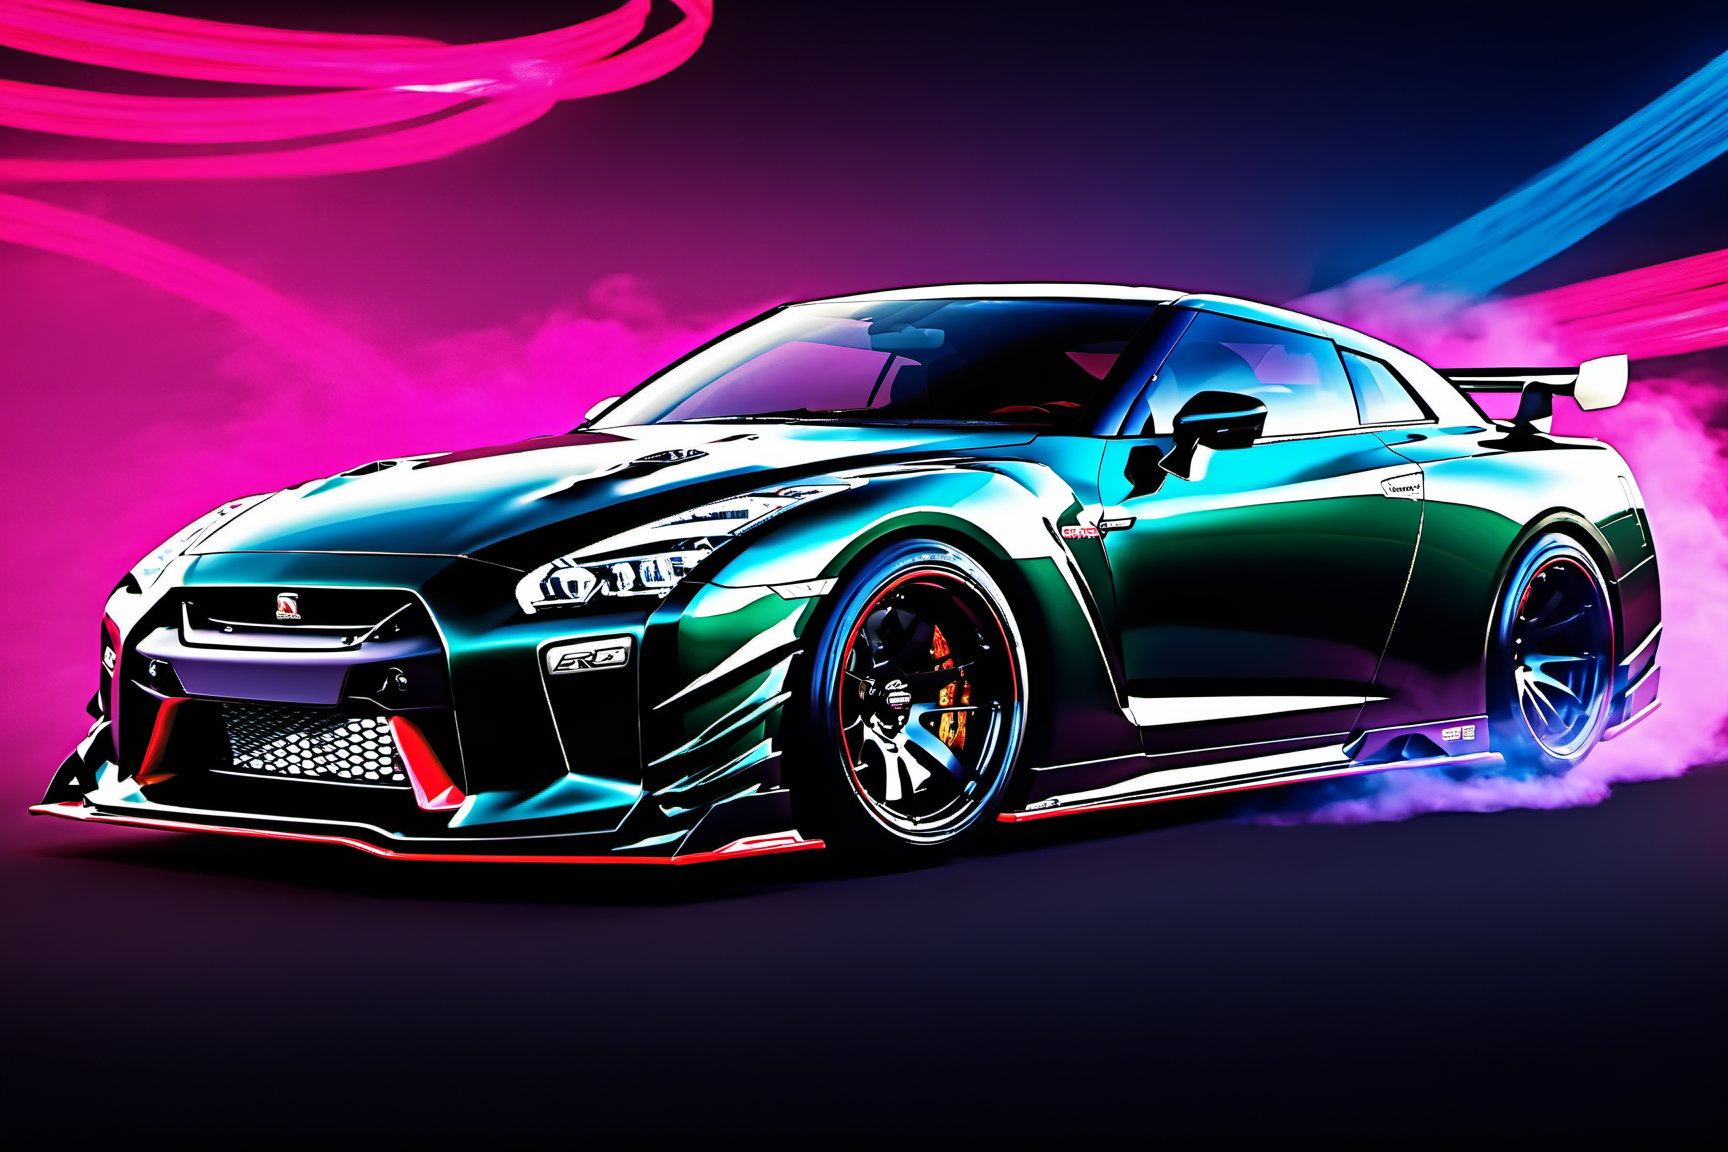 (((A photo realistic image of a Nissan GT-R Nismo))), ((wide shot)) , sharp, detailed car body , detailed tires, (masterpiece, best quality, ultra-detailed, 8K), race car, street racing-inspired, Drifting inspired, LED, ((Twin headlights)), (((Bright neon color racing stripes))), (Black racing wheels), Wheel spin showing motion, Show car in motion, Burnout,  wide body kit, modified car,  racing livery, masterpiece, best quality, realistic, ultra high res, (((depth of field))), (full dual color neon lights:1.2), (hard dual color lighting:1.4), (detailed background), (masterpiece:1.2), (ultra detailed), (best quality), intricate, comprehensive cinematic, magical photography, (gradients), glossy, Fast action style, Sideways drifting in to a turns, ,c_car,fire element